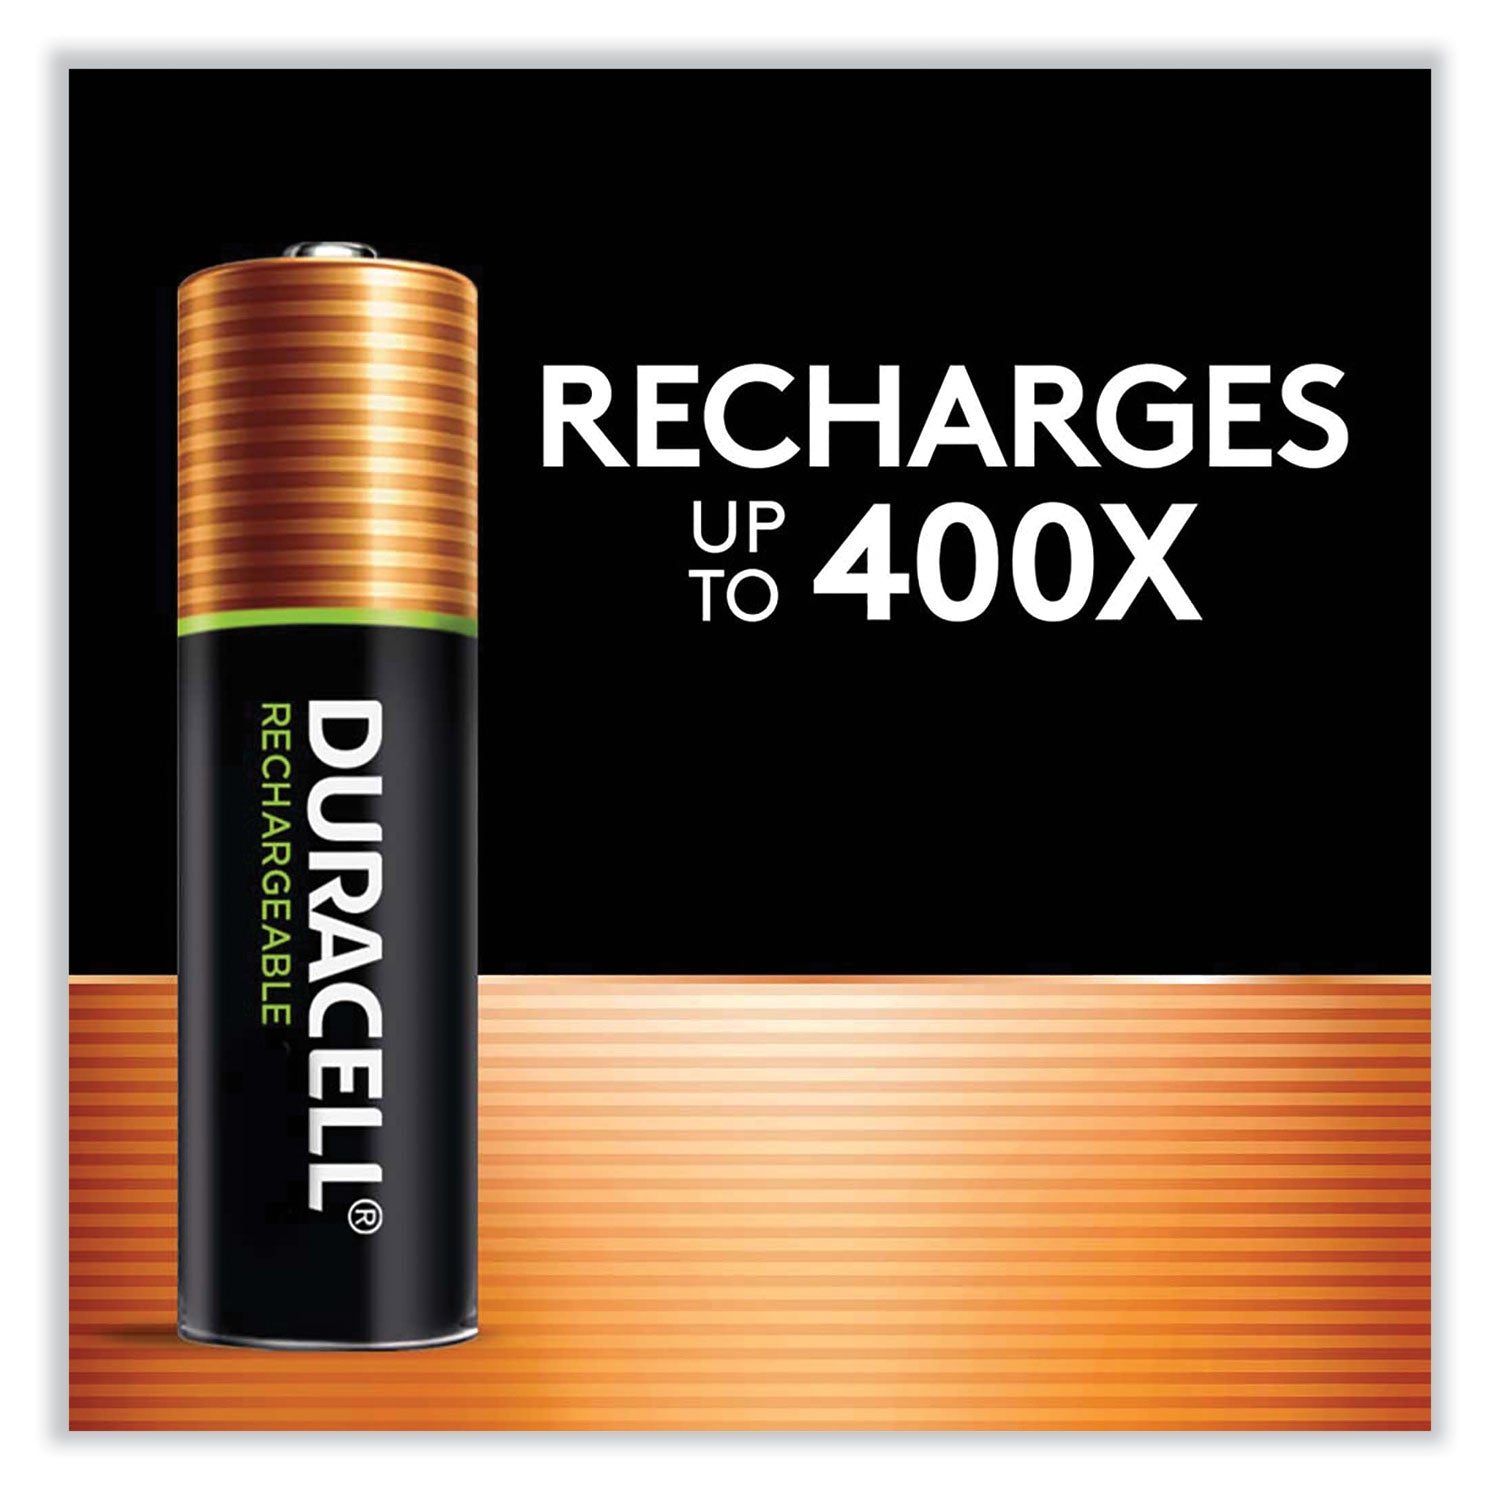 Rechargeable StayCharged NiMH Batteries, AA, 2/Pack - 